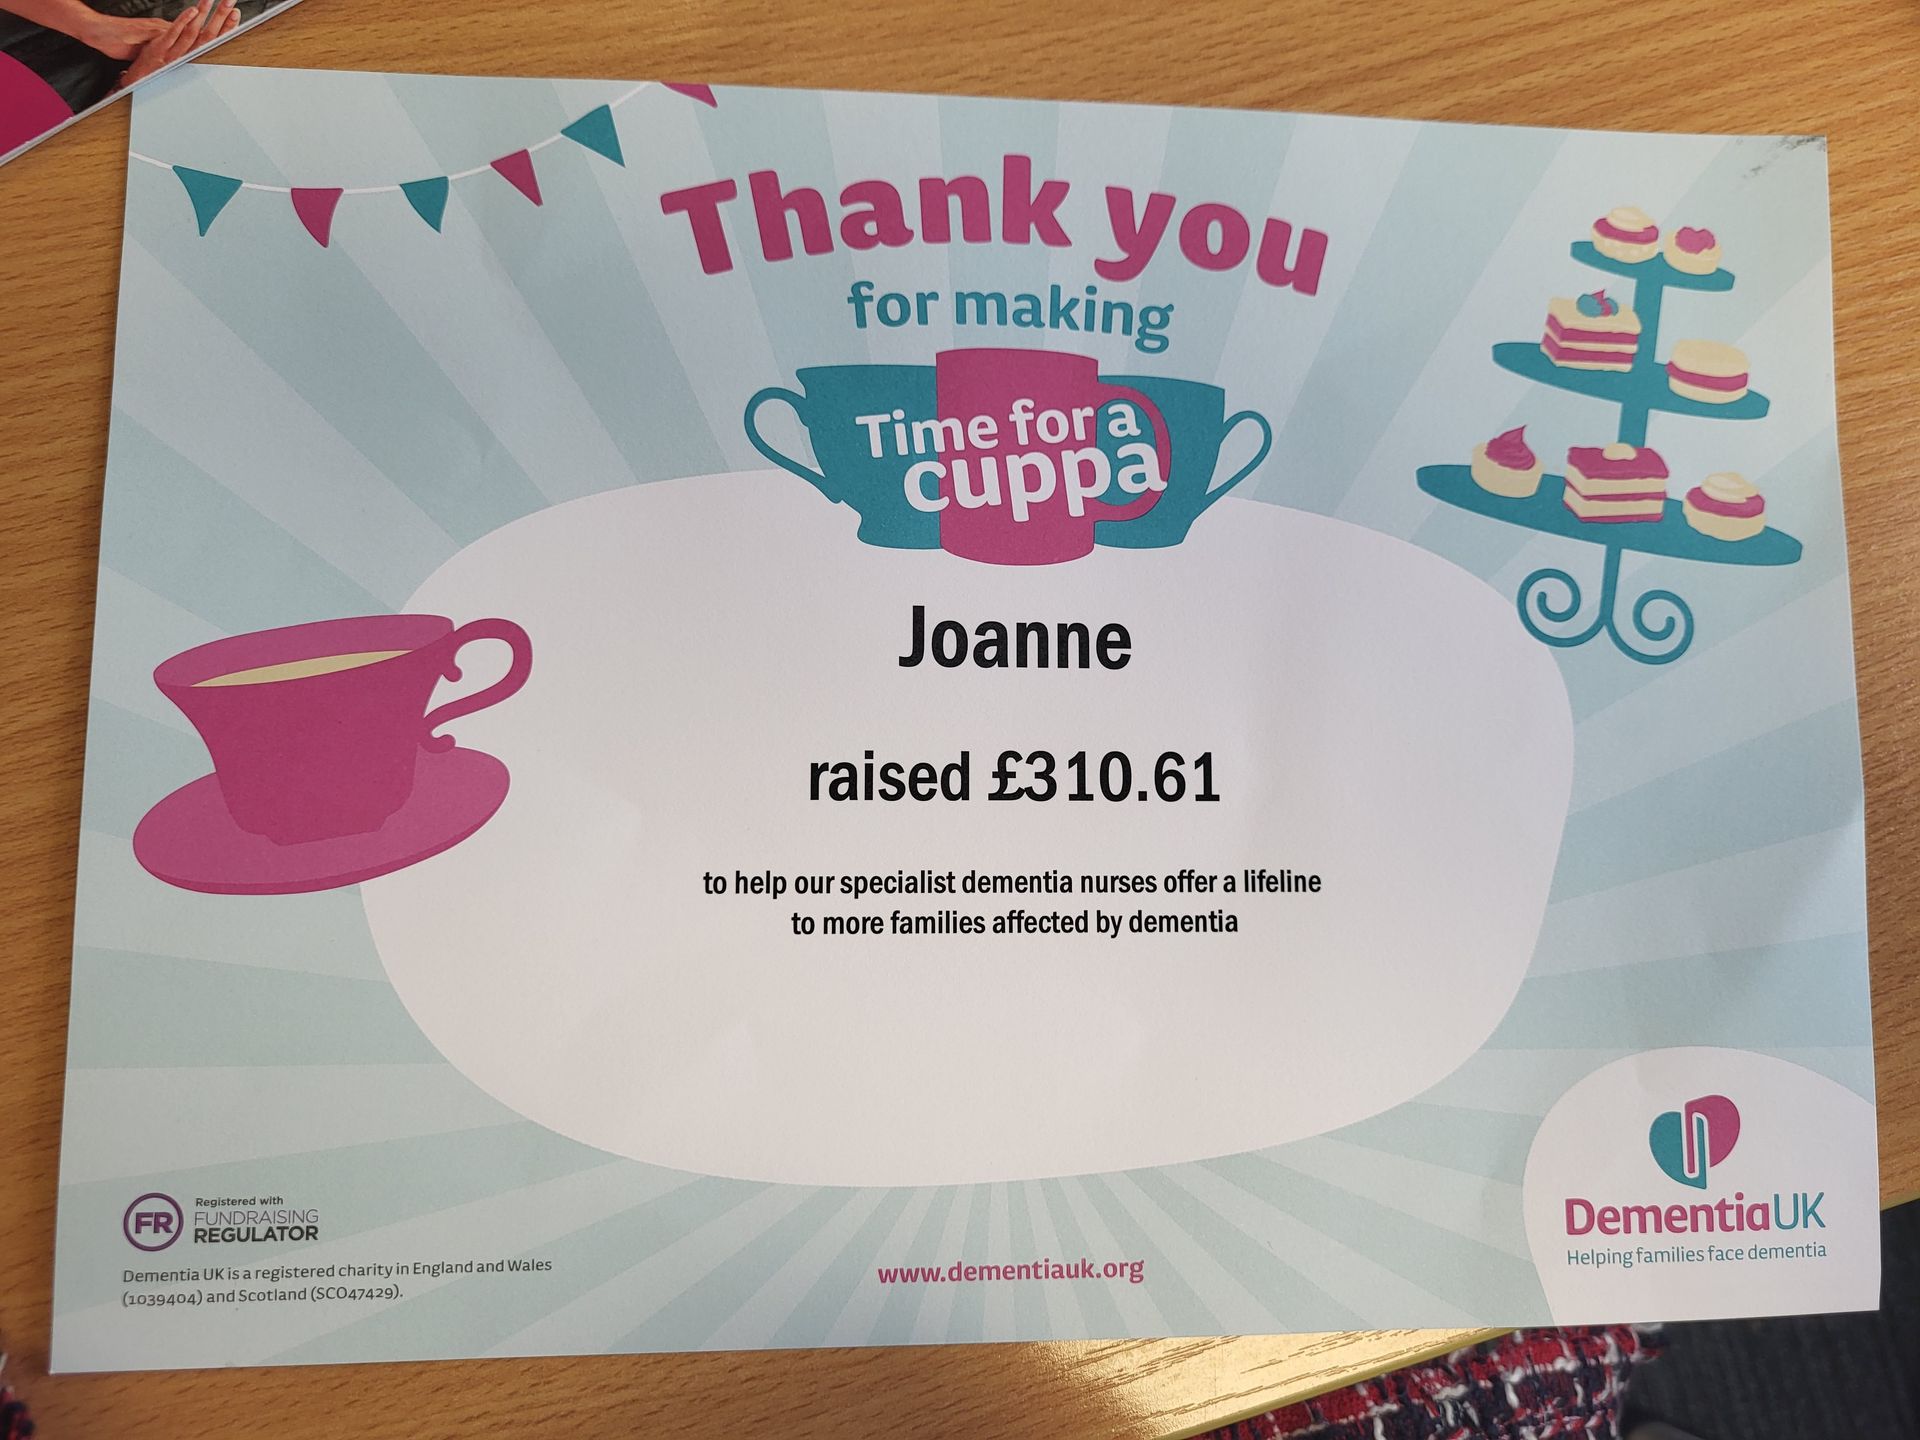 a thank you card for making time for a cuppa